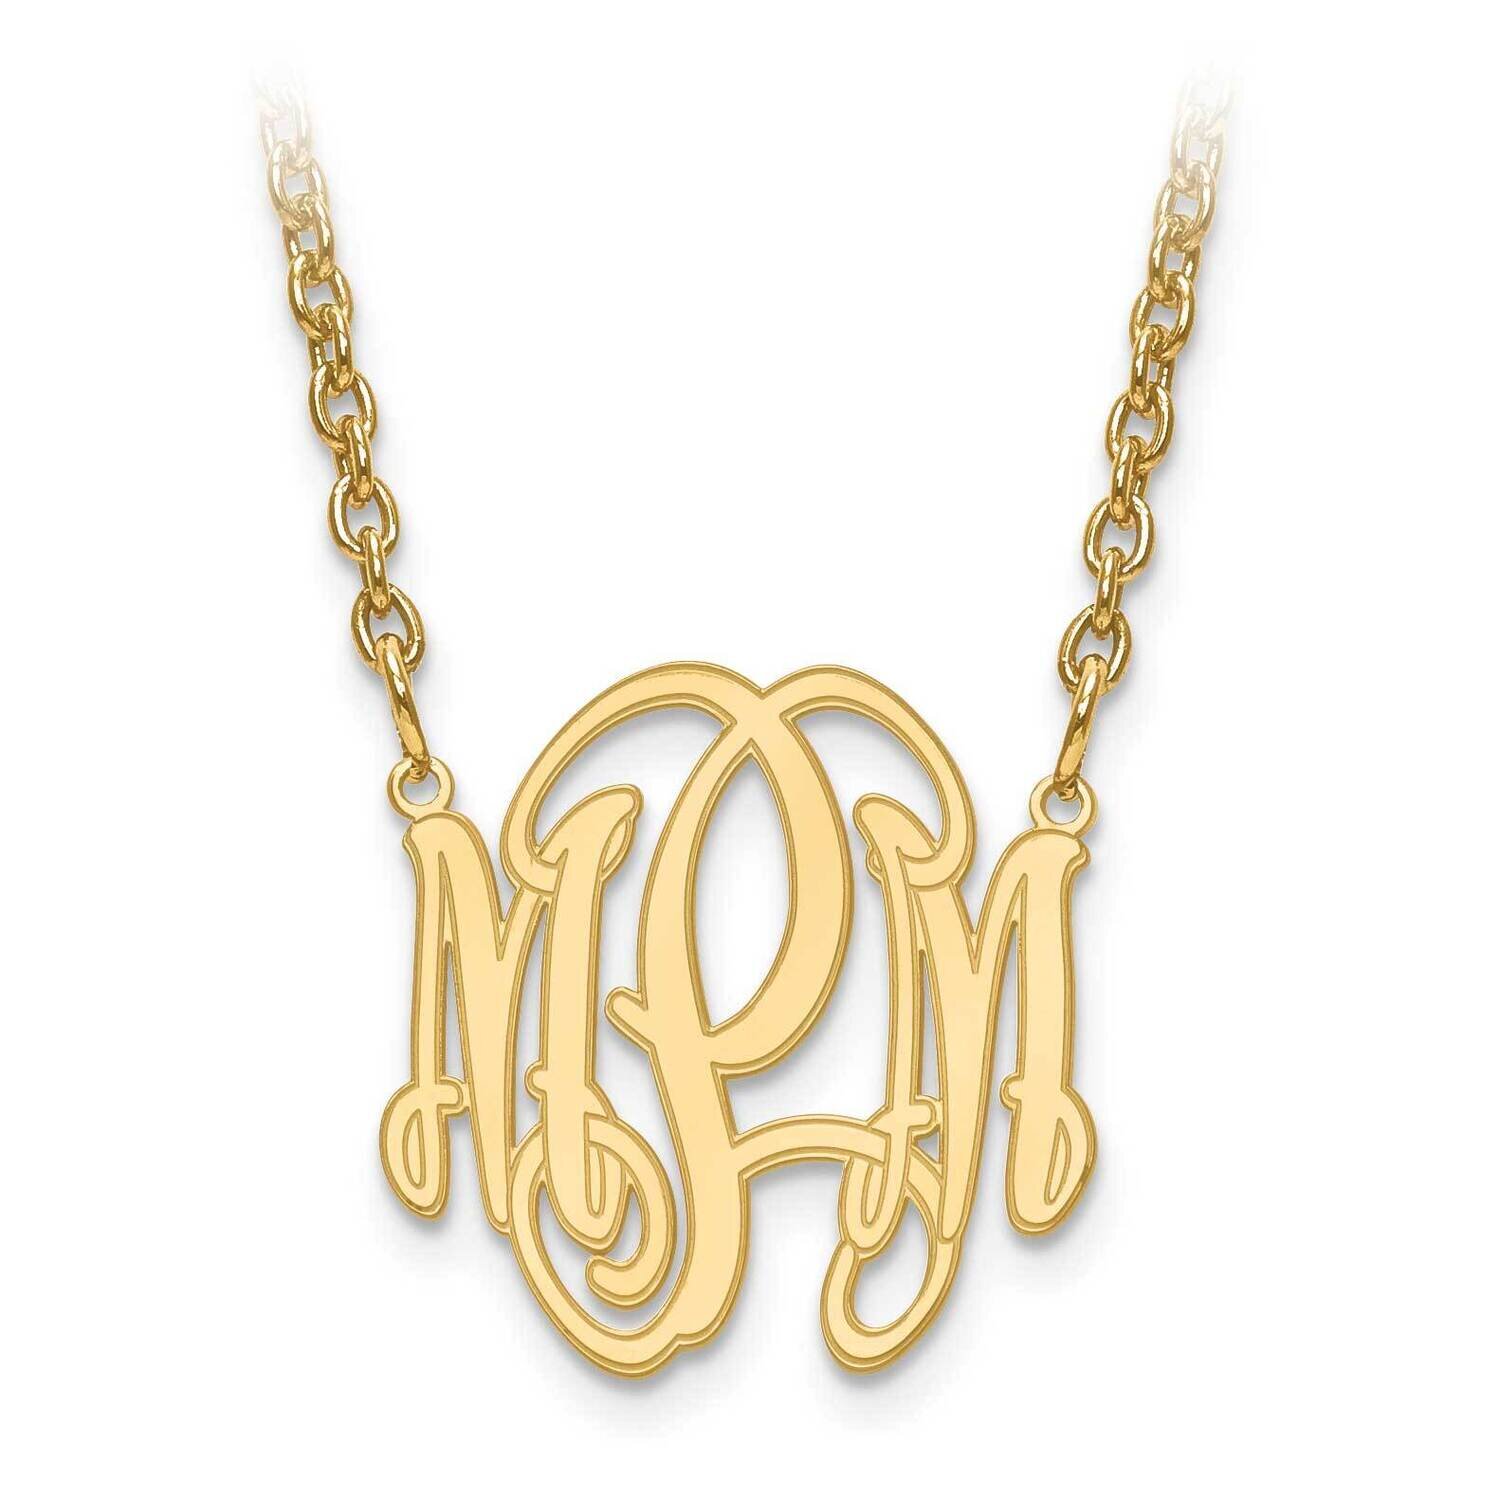 Circular Shaped Etched Outline Monogram Plate with Chain 14k Gold Laser XNA552Y